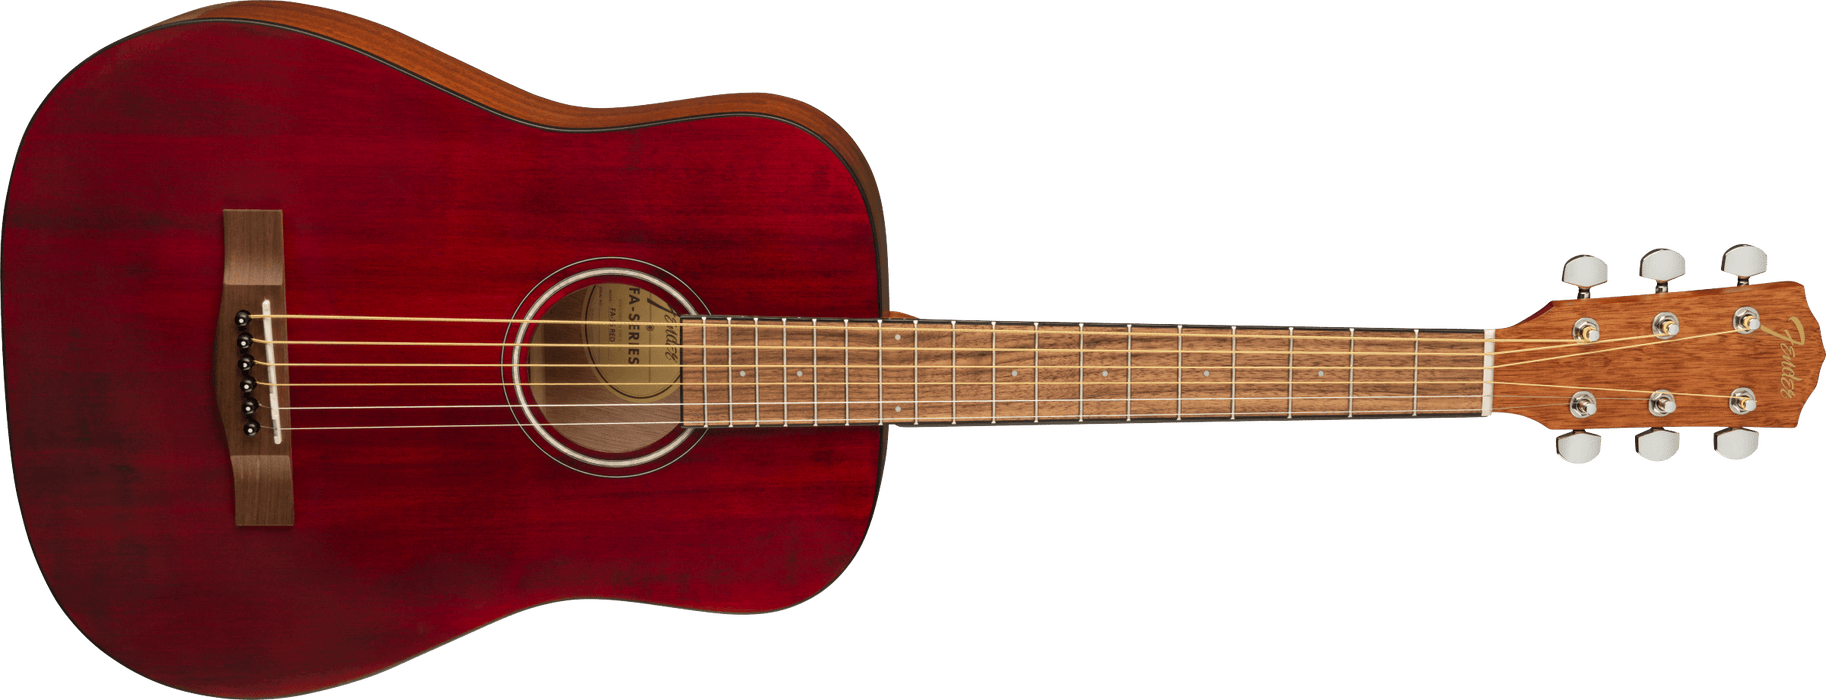 Fender FA-15 3/4 Scale Steel Walnut Fingerboard Red Acoustic Guitar With Gig Bag